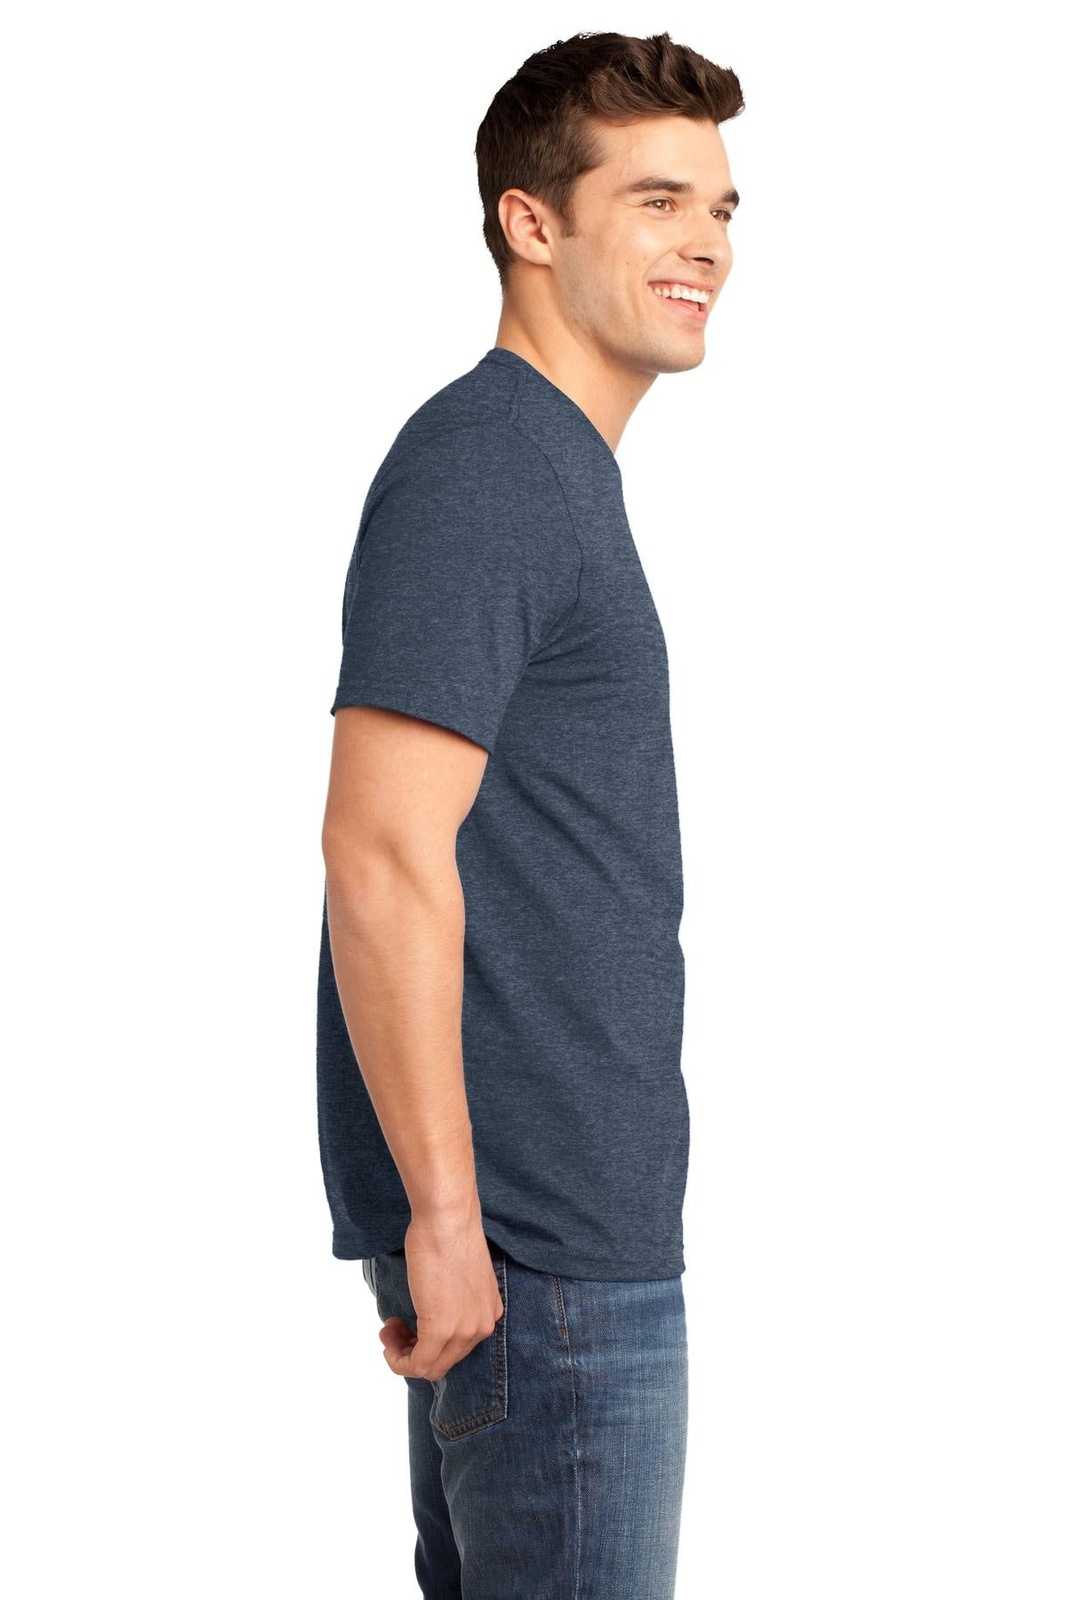 District DT6000 Very Important Tee - Heathered Navy - HIT a Double - 3